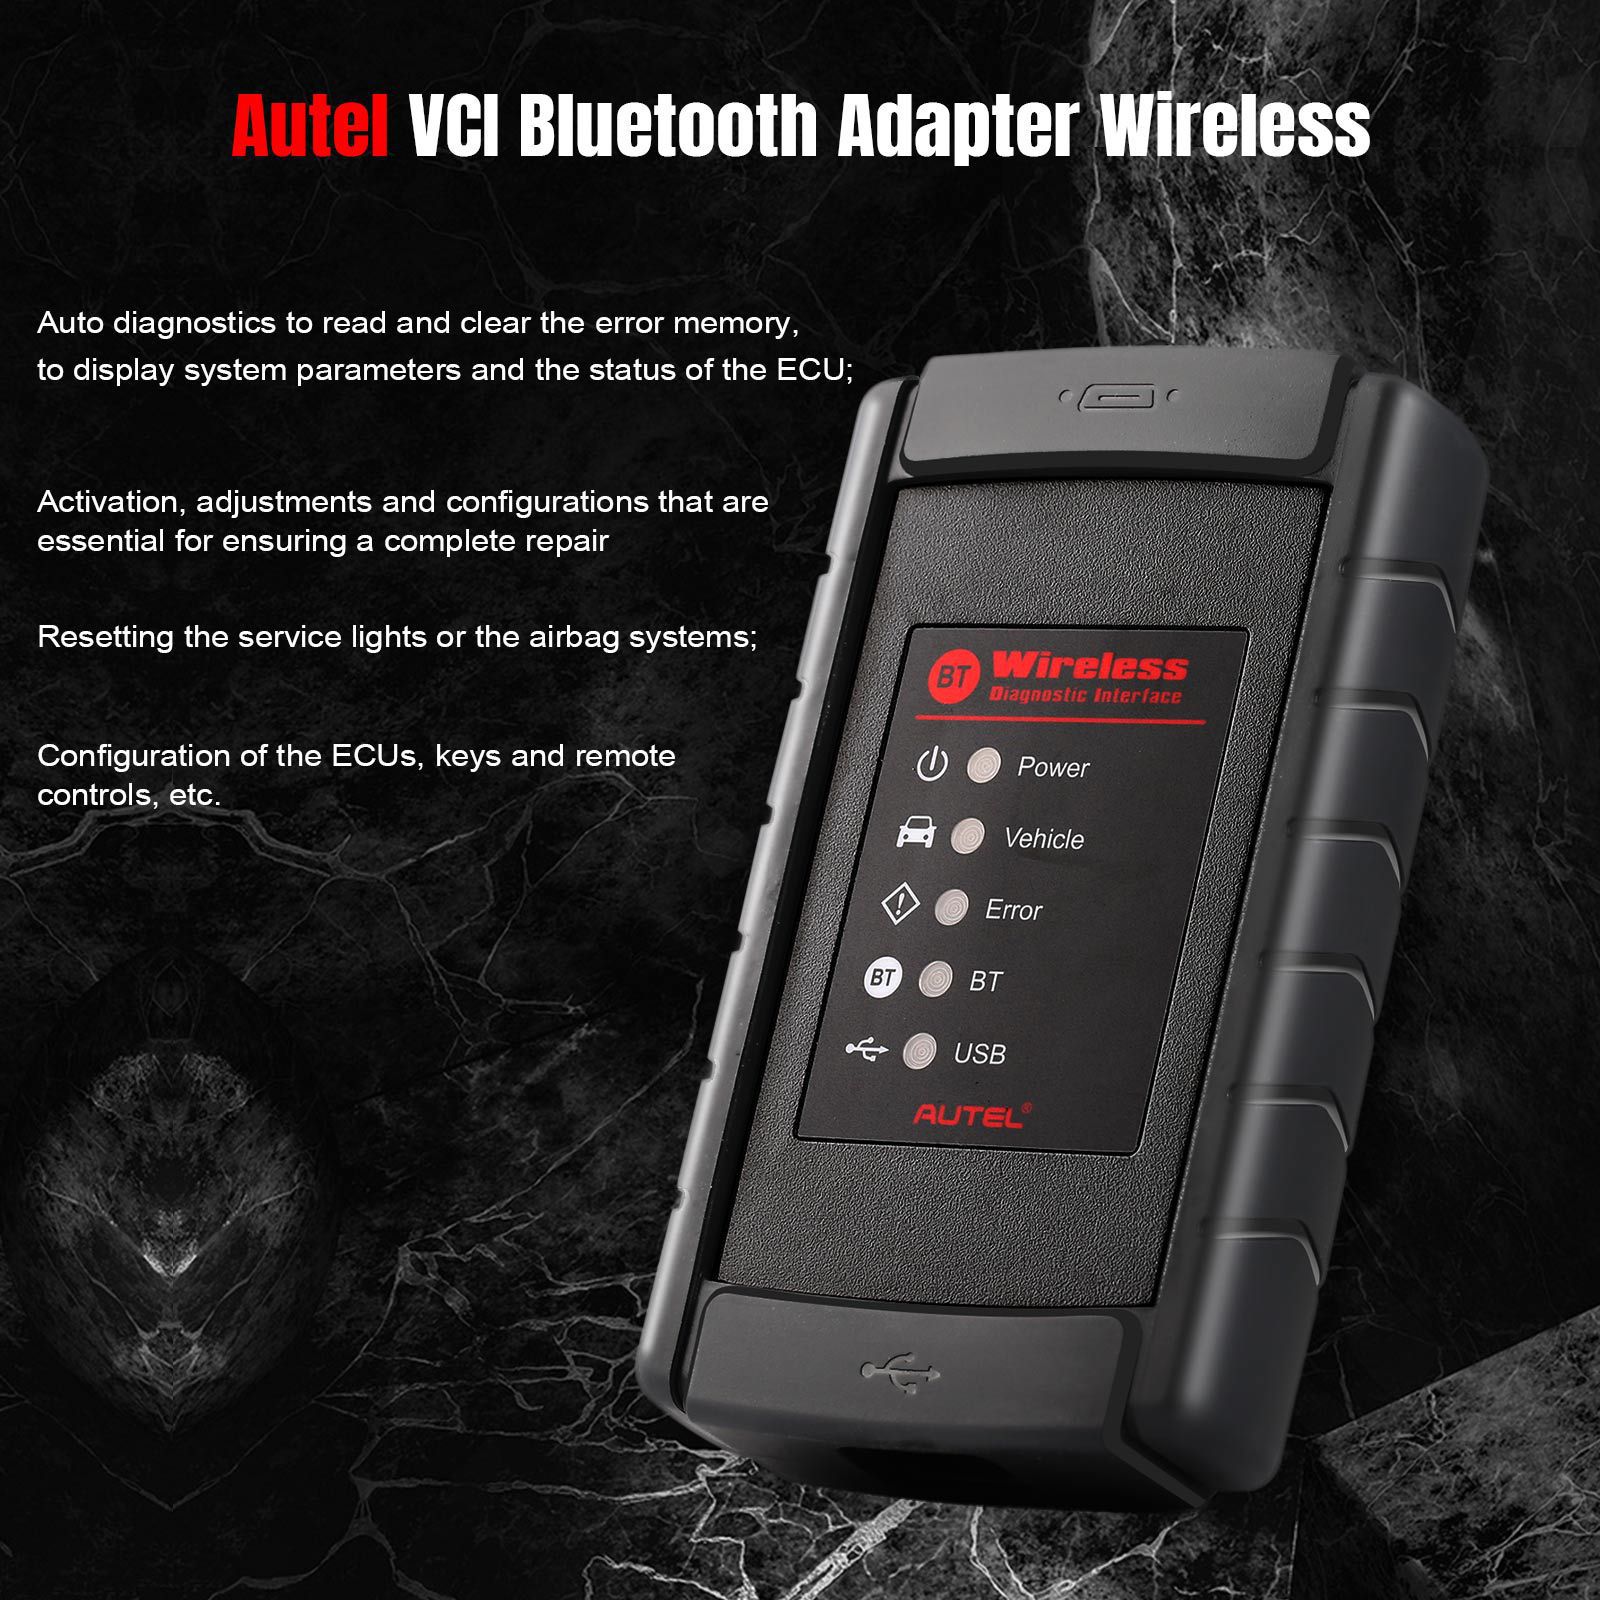 Original Autel VCI Bluetooth Adapter Wireless Diagnostic Interface Bluetooth Connection VCI For MS908S/ MS908/ MK908/ MS905/ MaxiSys Mini